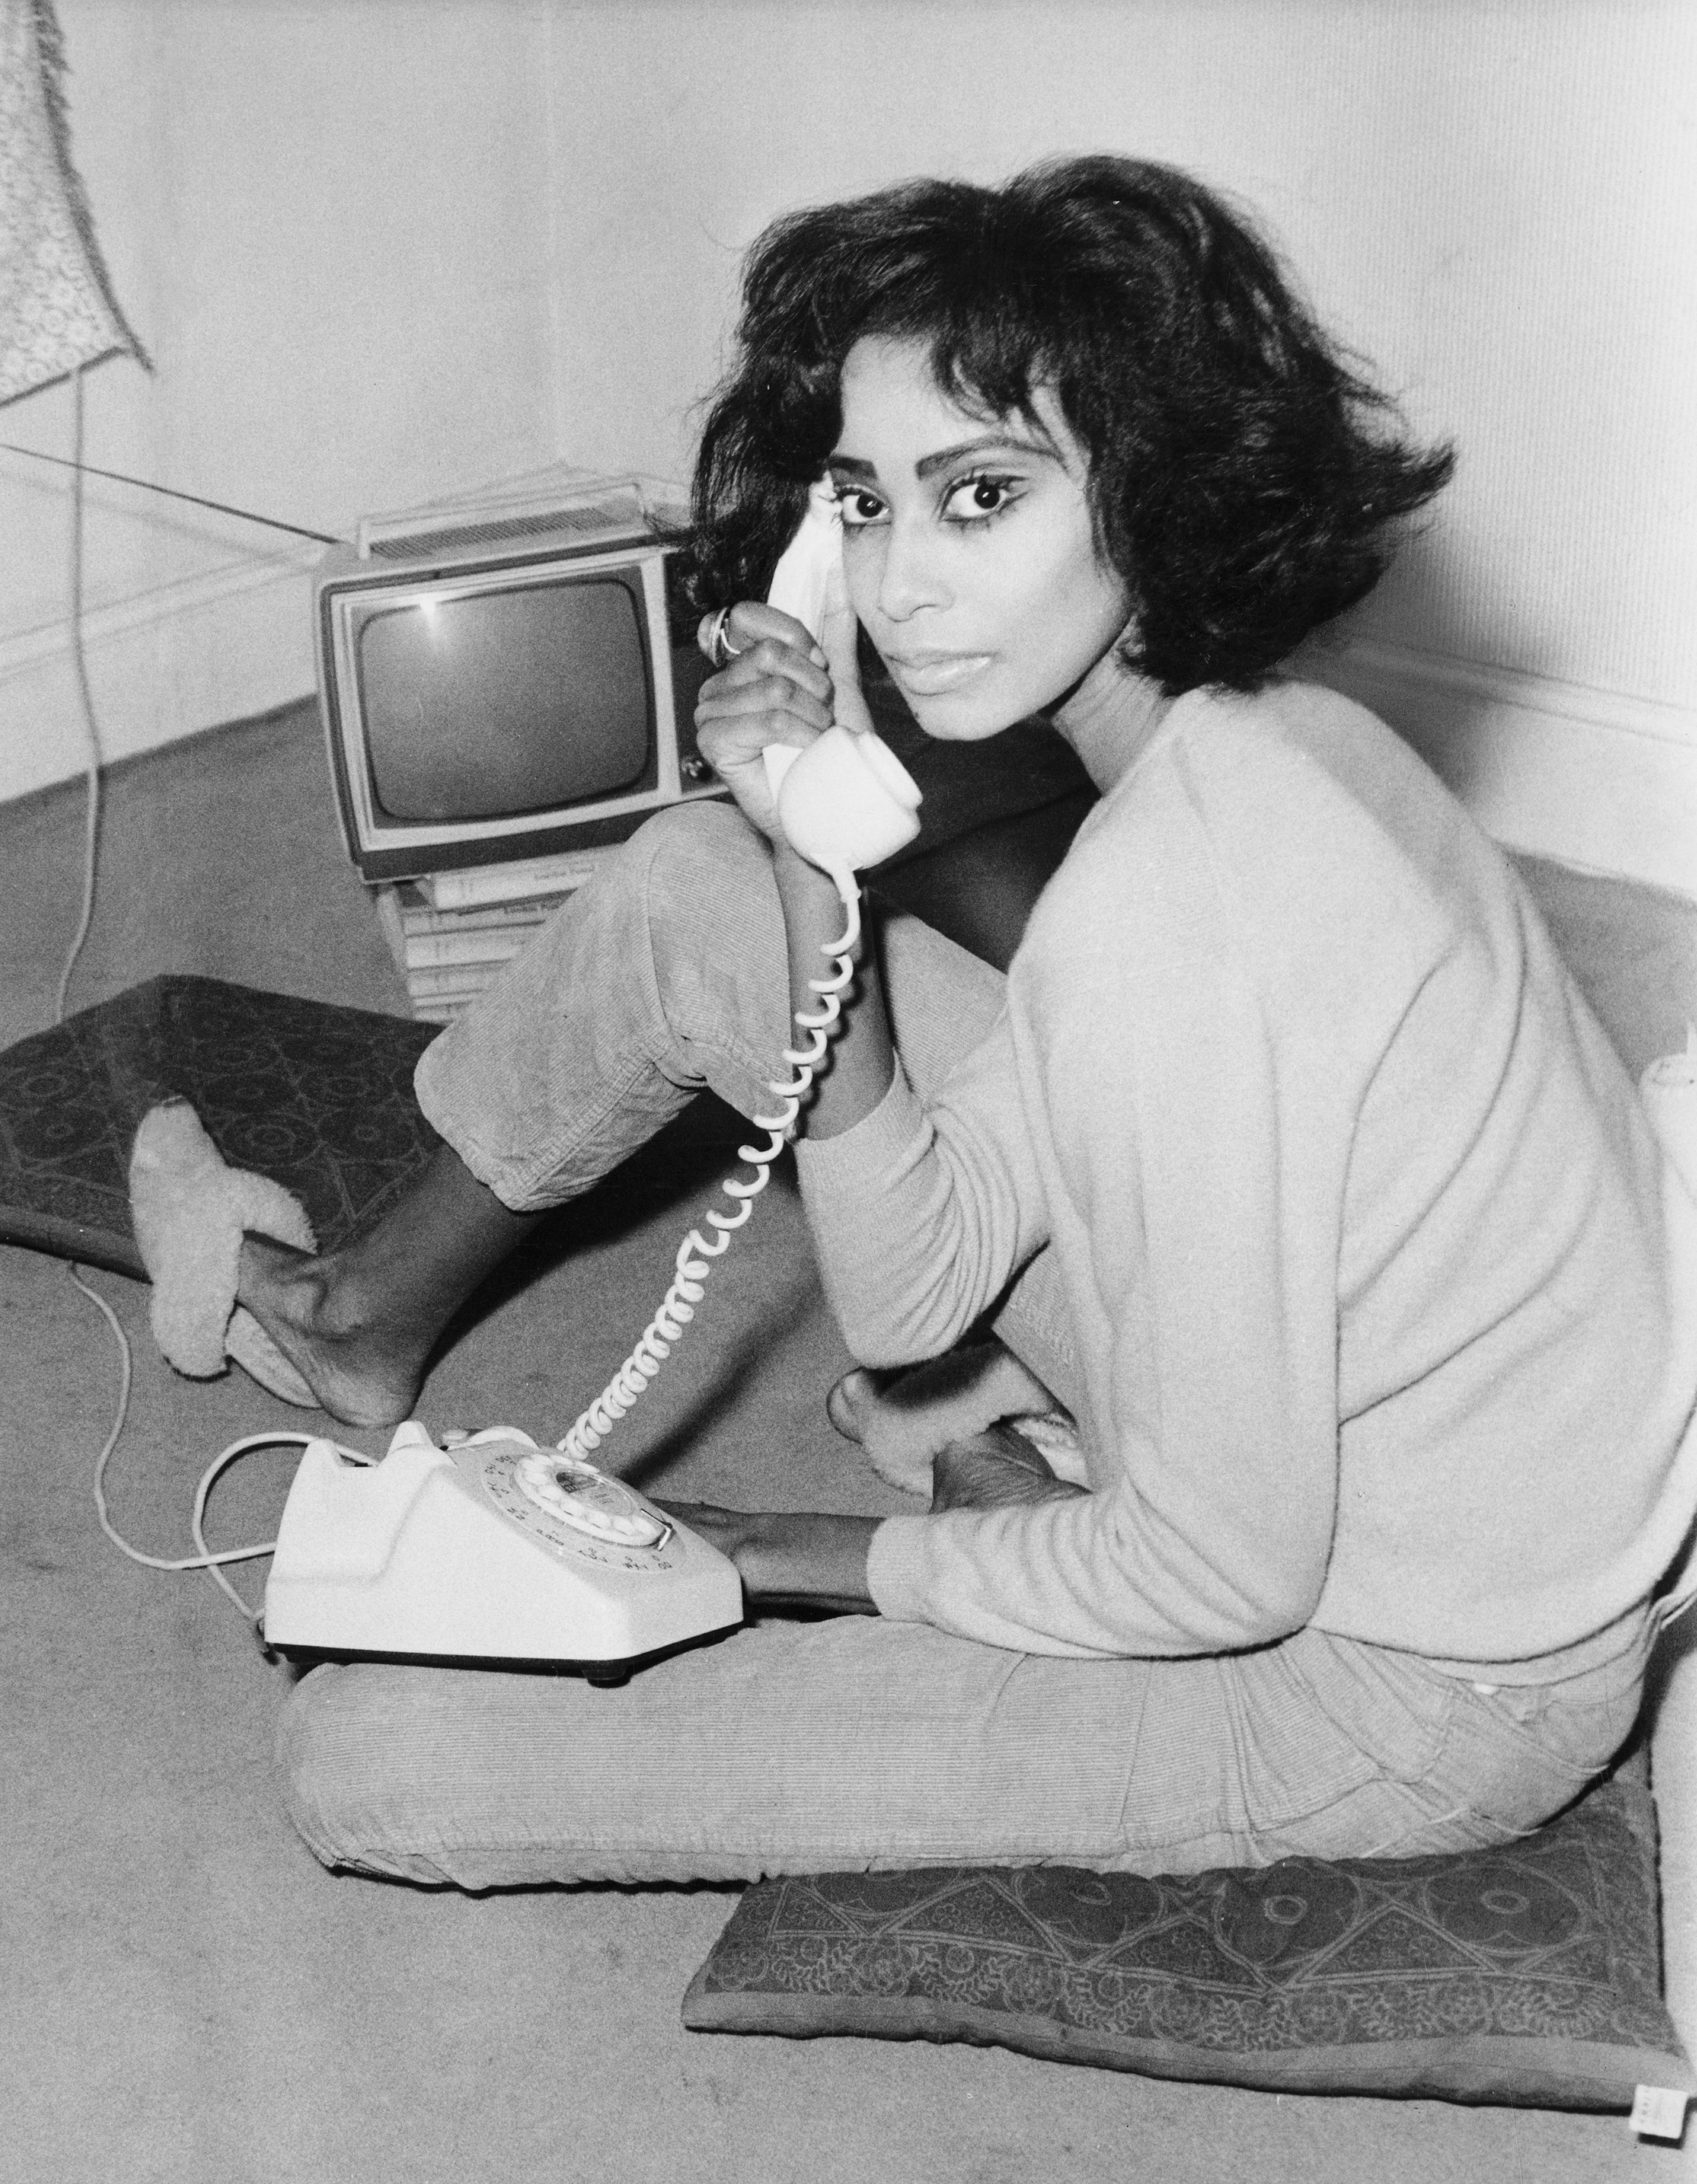 Donyale Luna, wearing a long sleeved top and jeans, sitting on a cushion on the floor. She is holding a corded phone to her ear and looking into the camera with a TV in the background